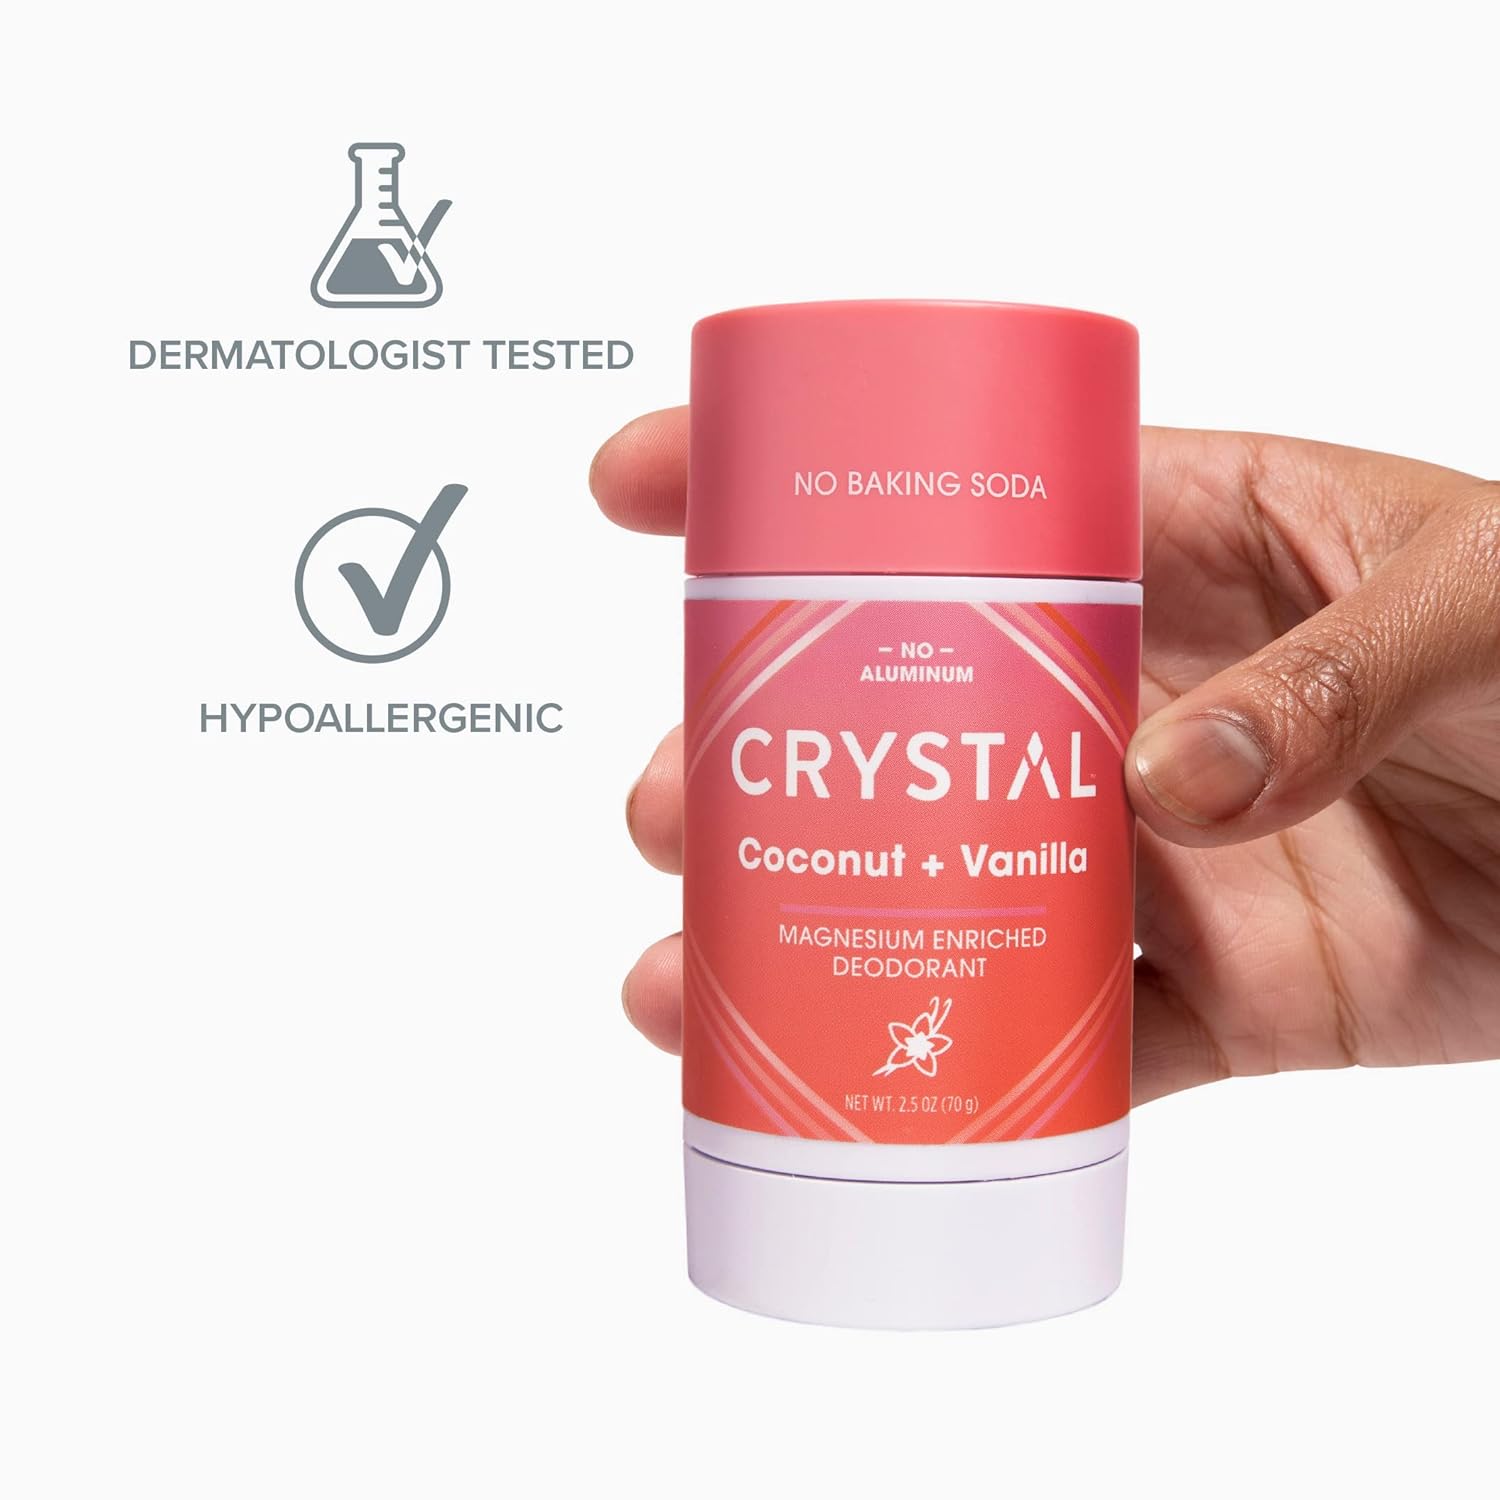 Crystal Magnesium Solid Stick Natural Deodorant, Non-Irritating Aluminum Free Deodorant for Men or Women, Safely and Effectively Fights Odor, Baking Soda Free, Coconut + Vanilla, 2.5 oz : Beauty & Personal Care